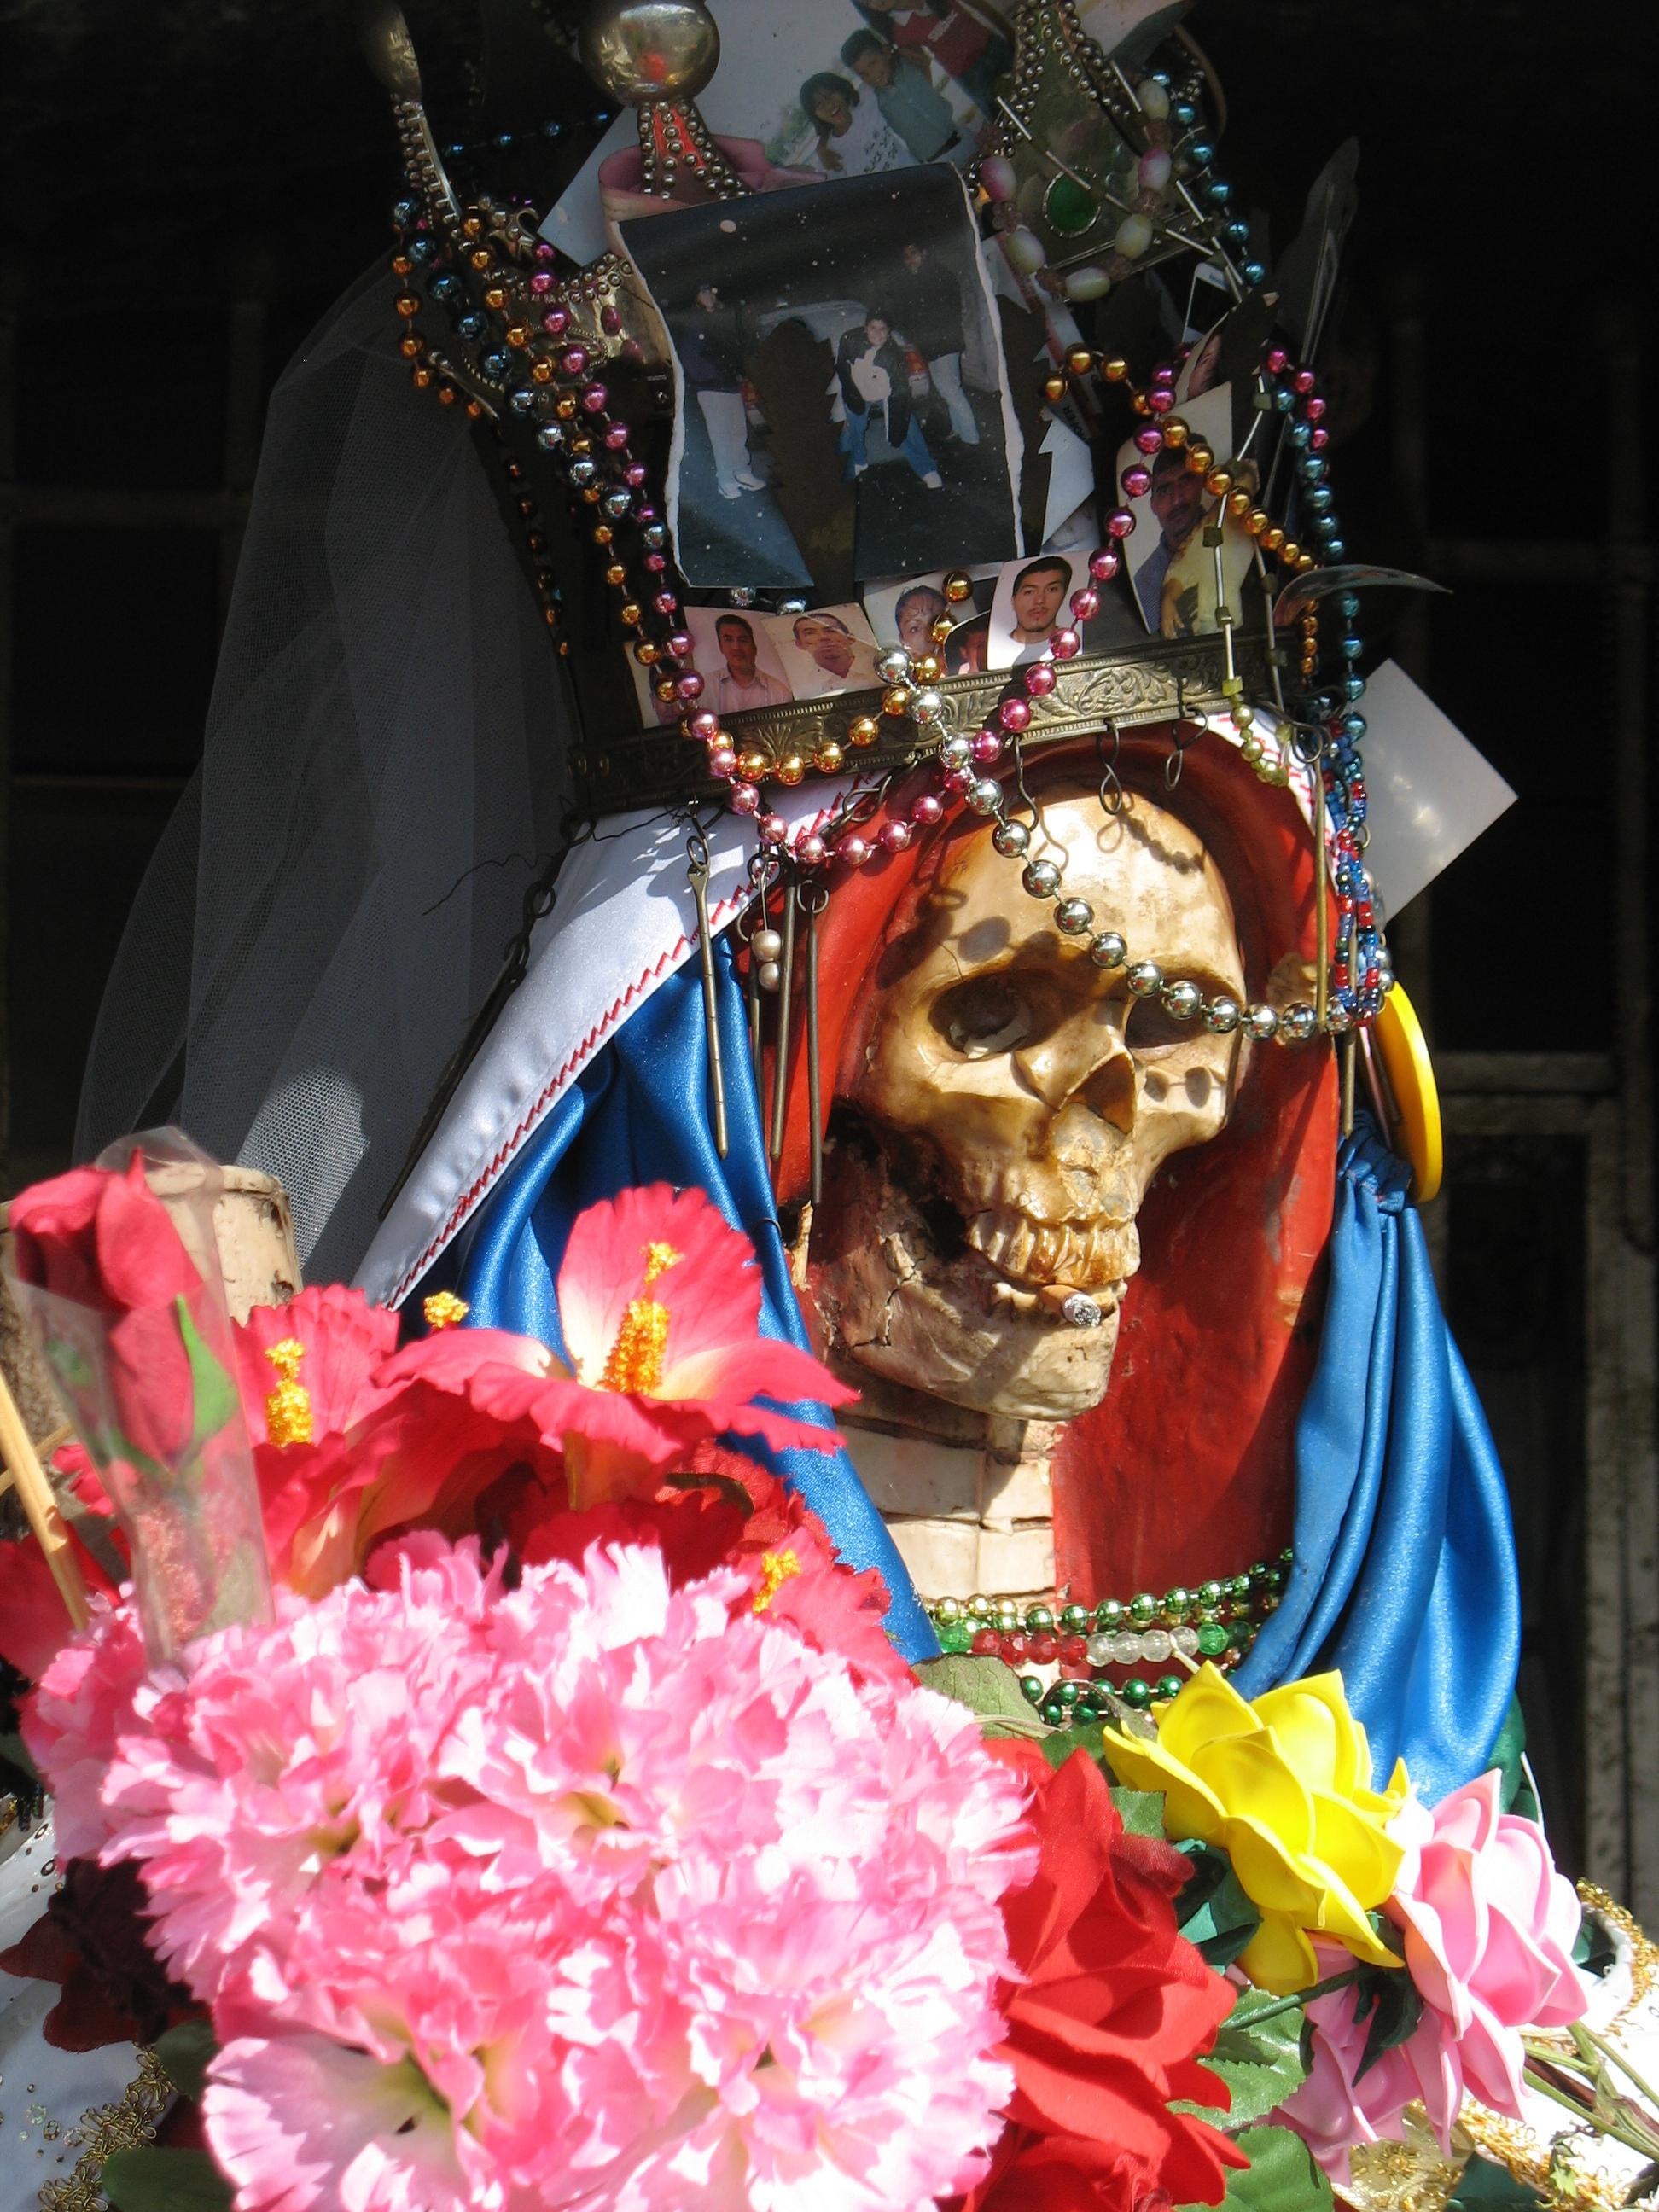 A skeleton decorated with flowers and jewelry symbolizing Santa Muerte